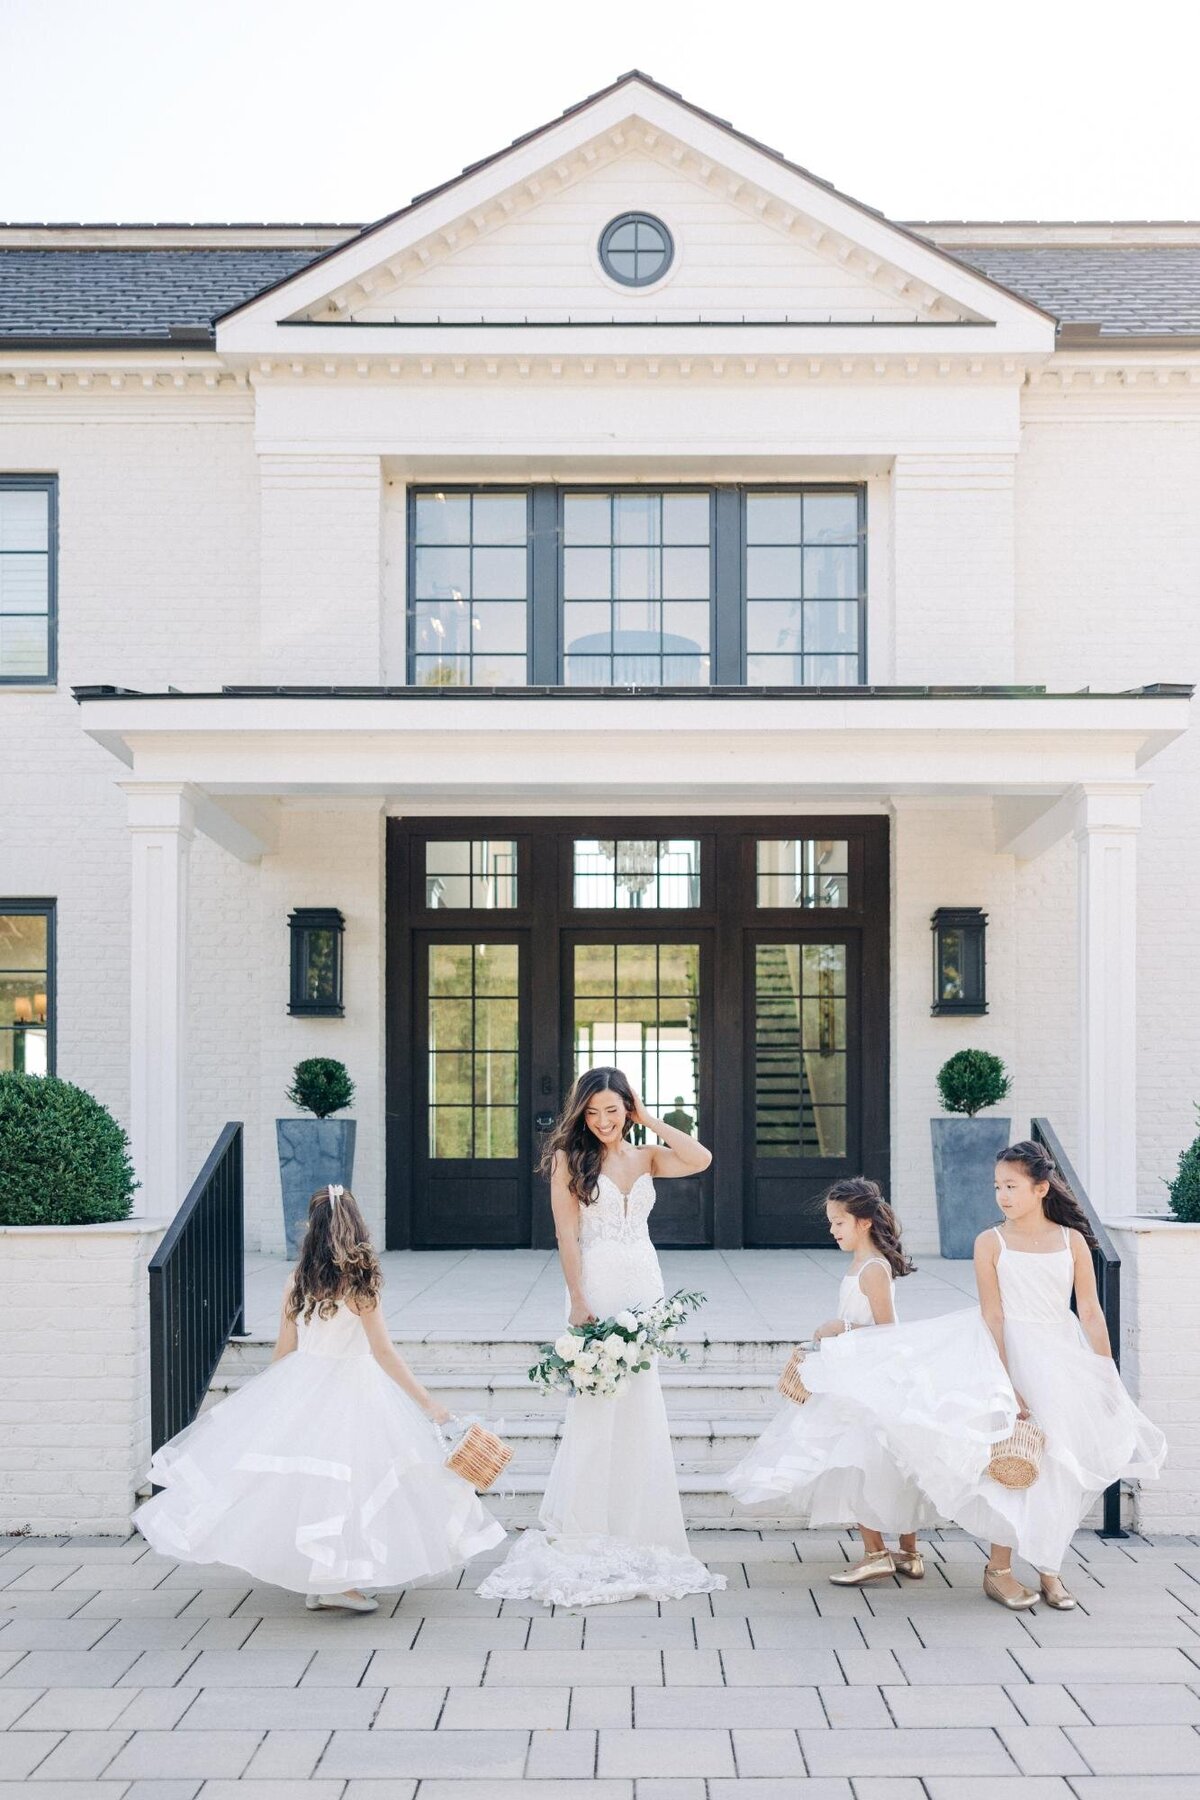 A bride standing at the entrance of a building with three young bridesmaids.